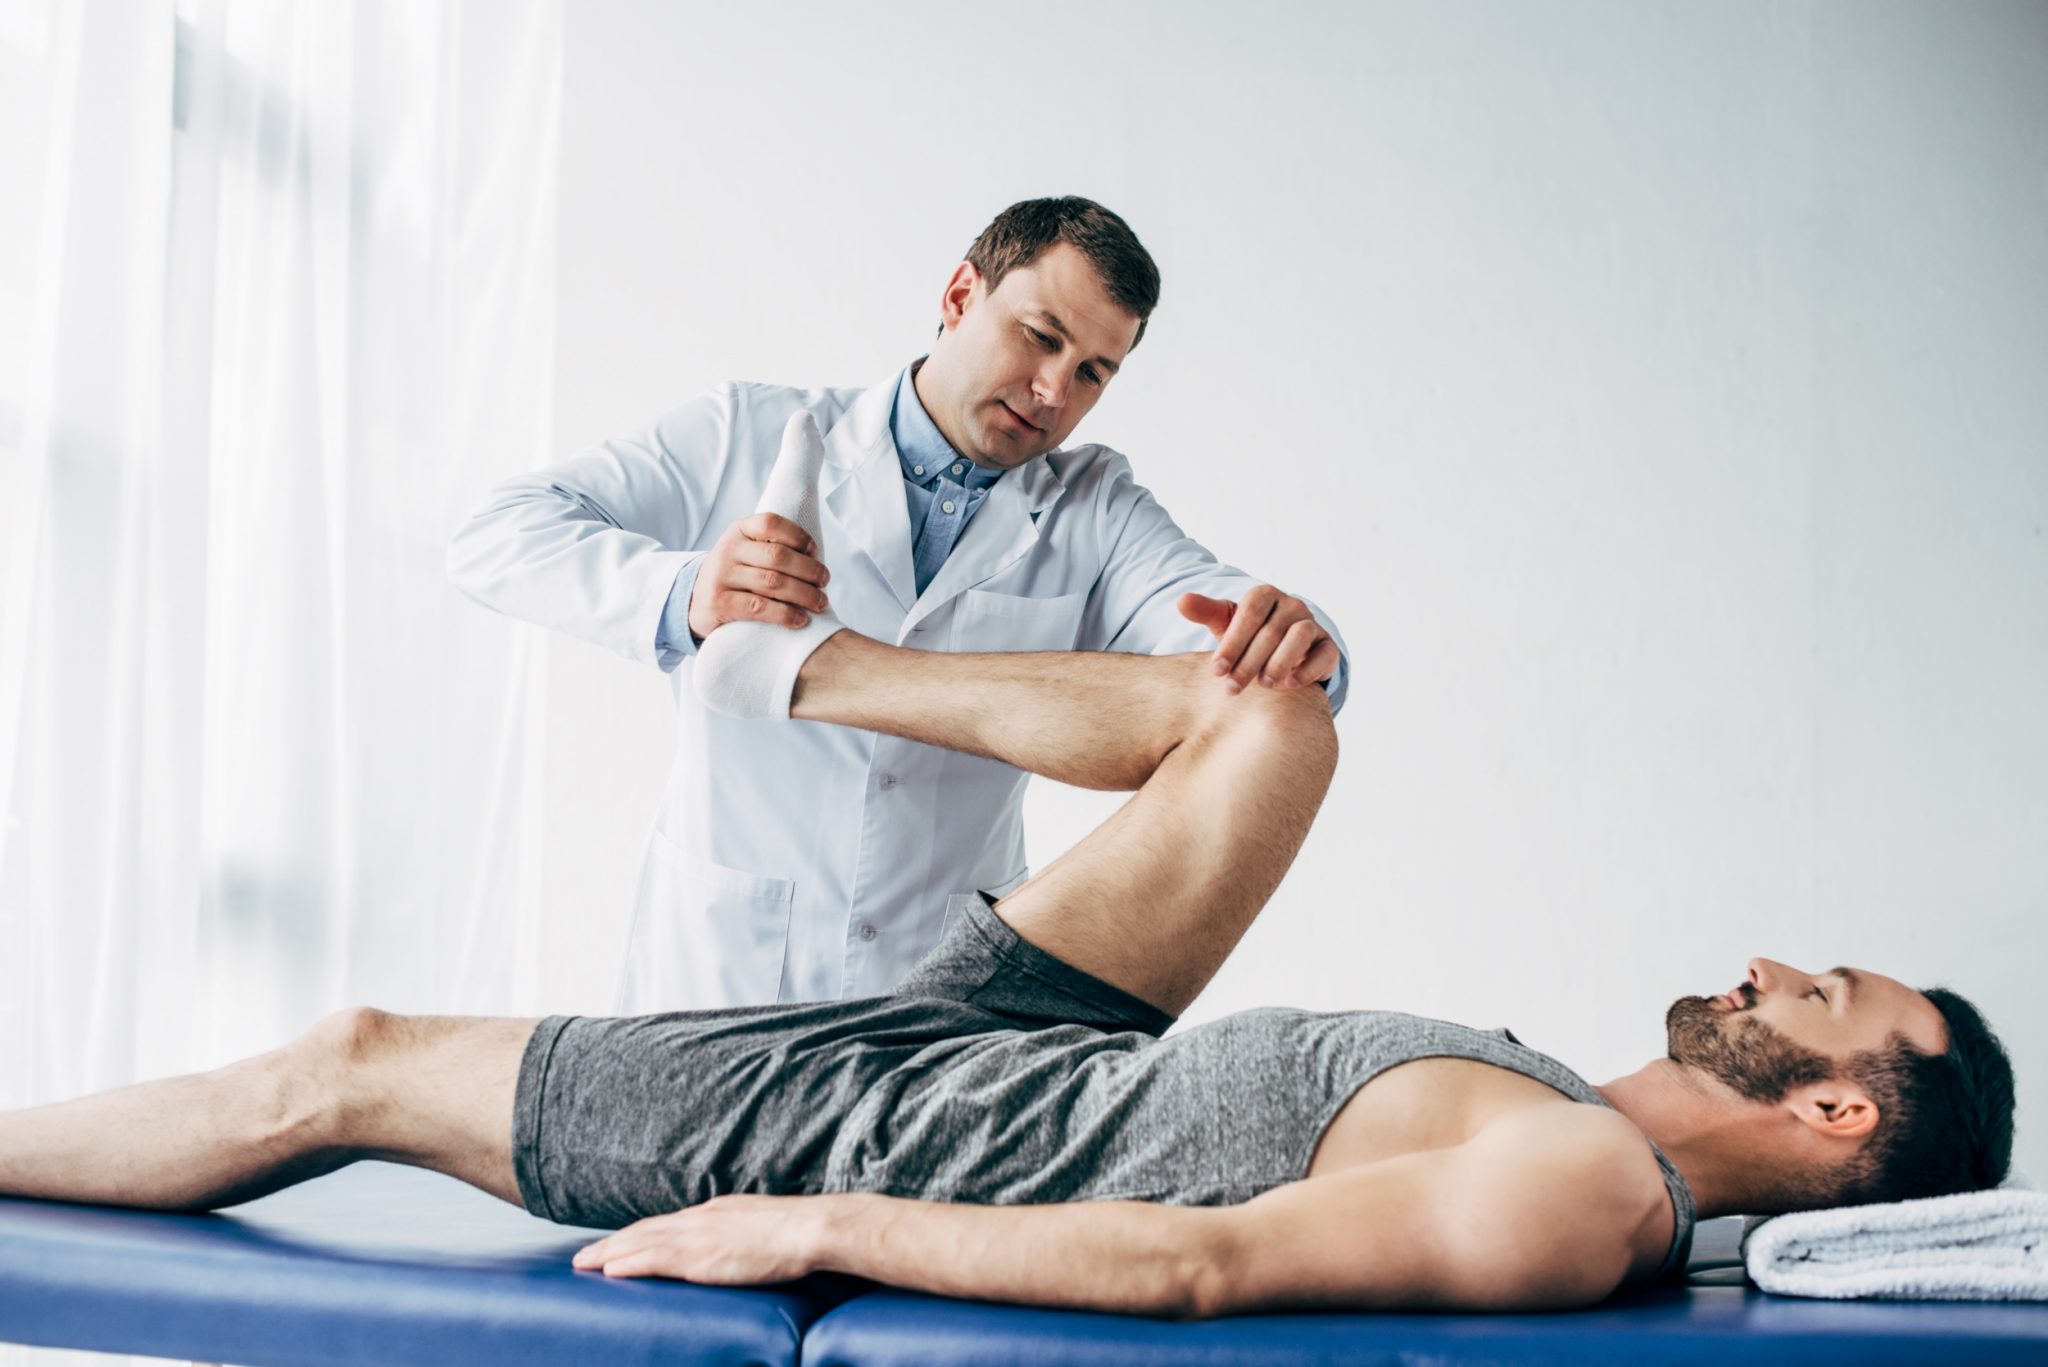 Do Athletes Need a Chiropractor?